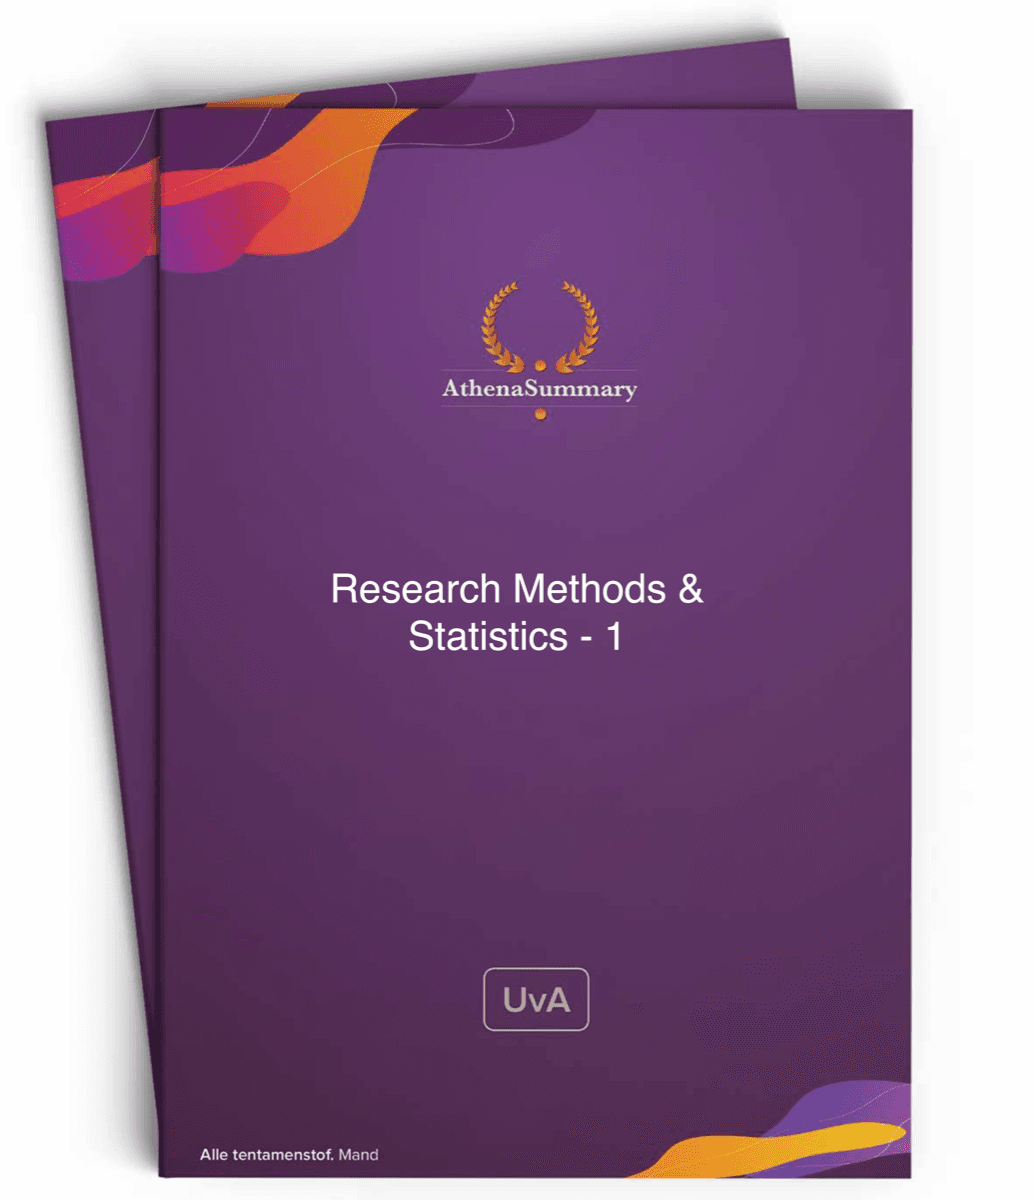 Literature Summary: Research Methods and Statistics - 1